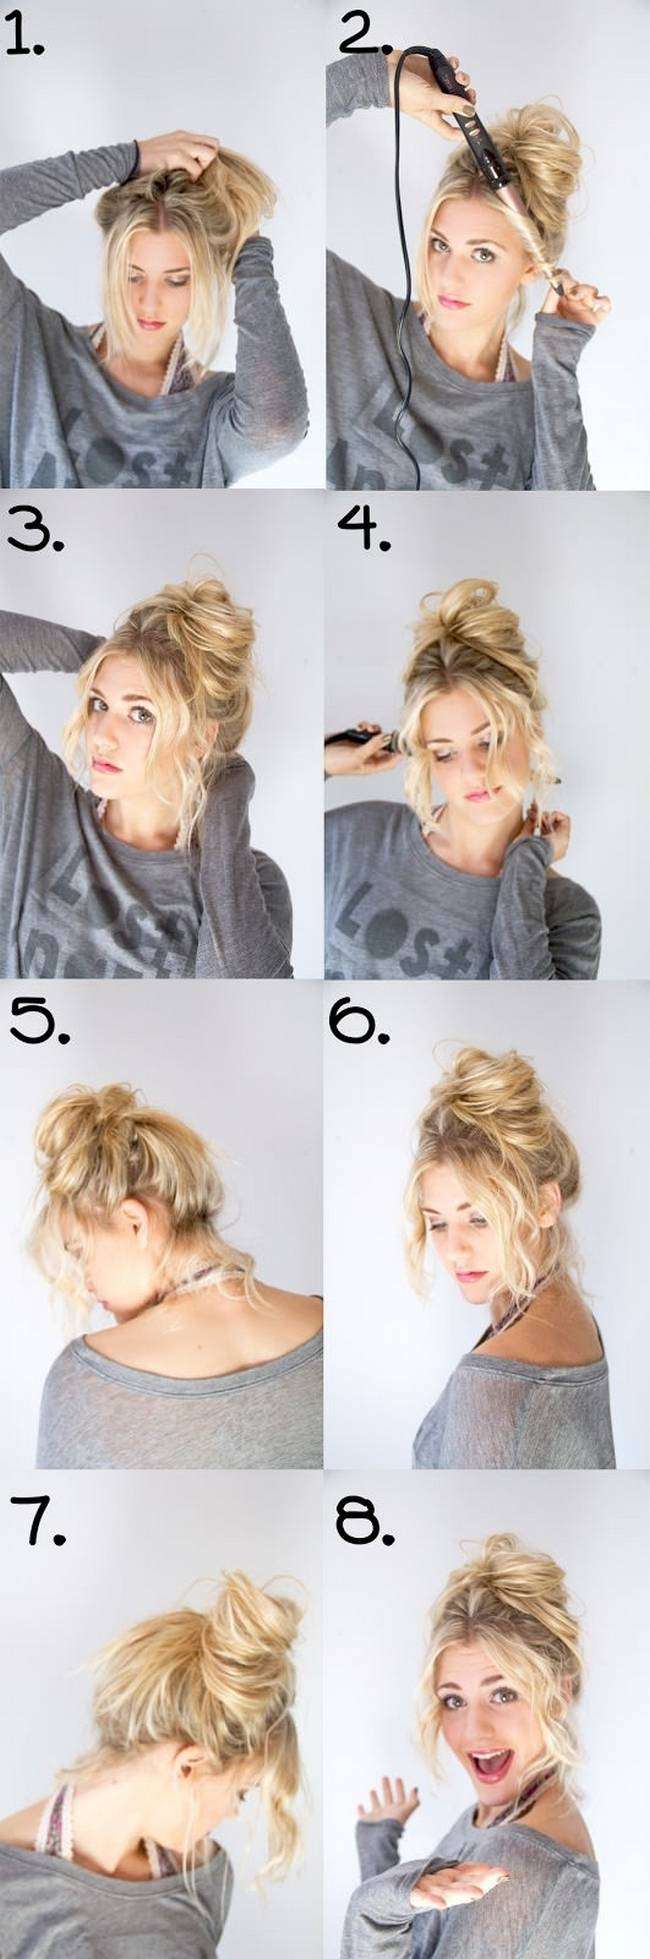 21 Easy Messy Bun Tutorials For The Perfect Disheveled Look - Gurl ...